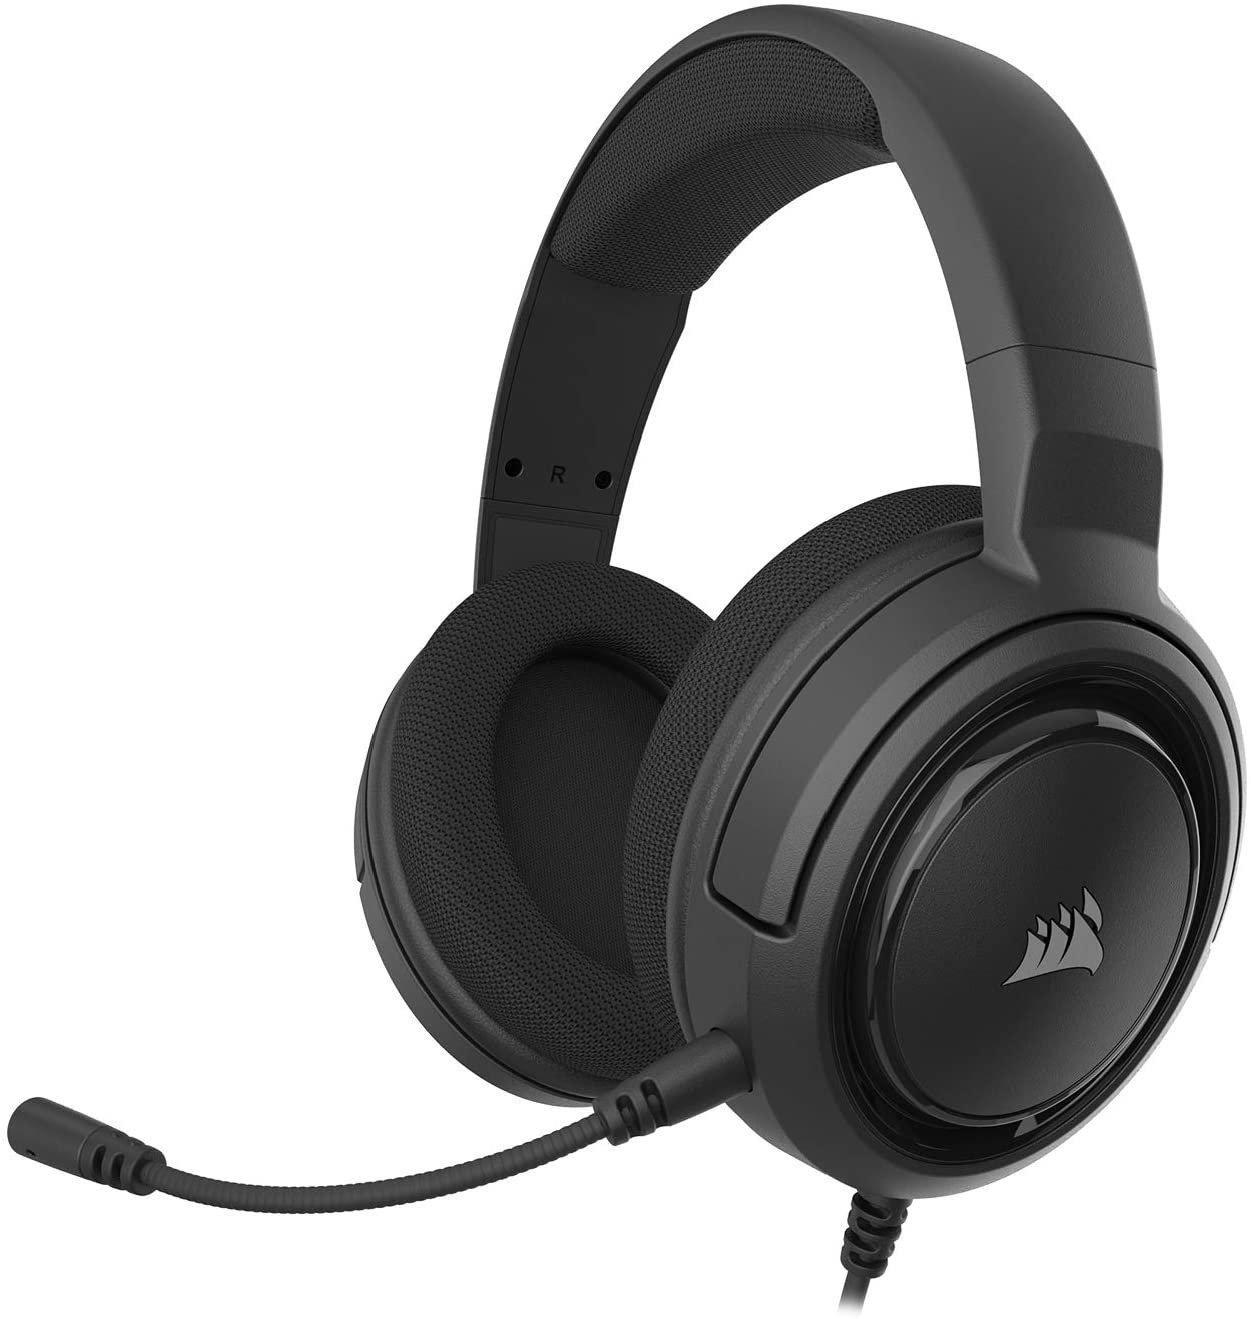 list item 1 of 7 CORSAIR HS45 SURROUND Universal Wired Gaming Headset